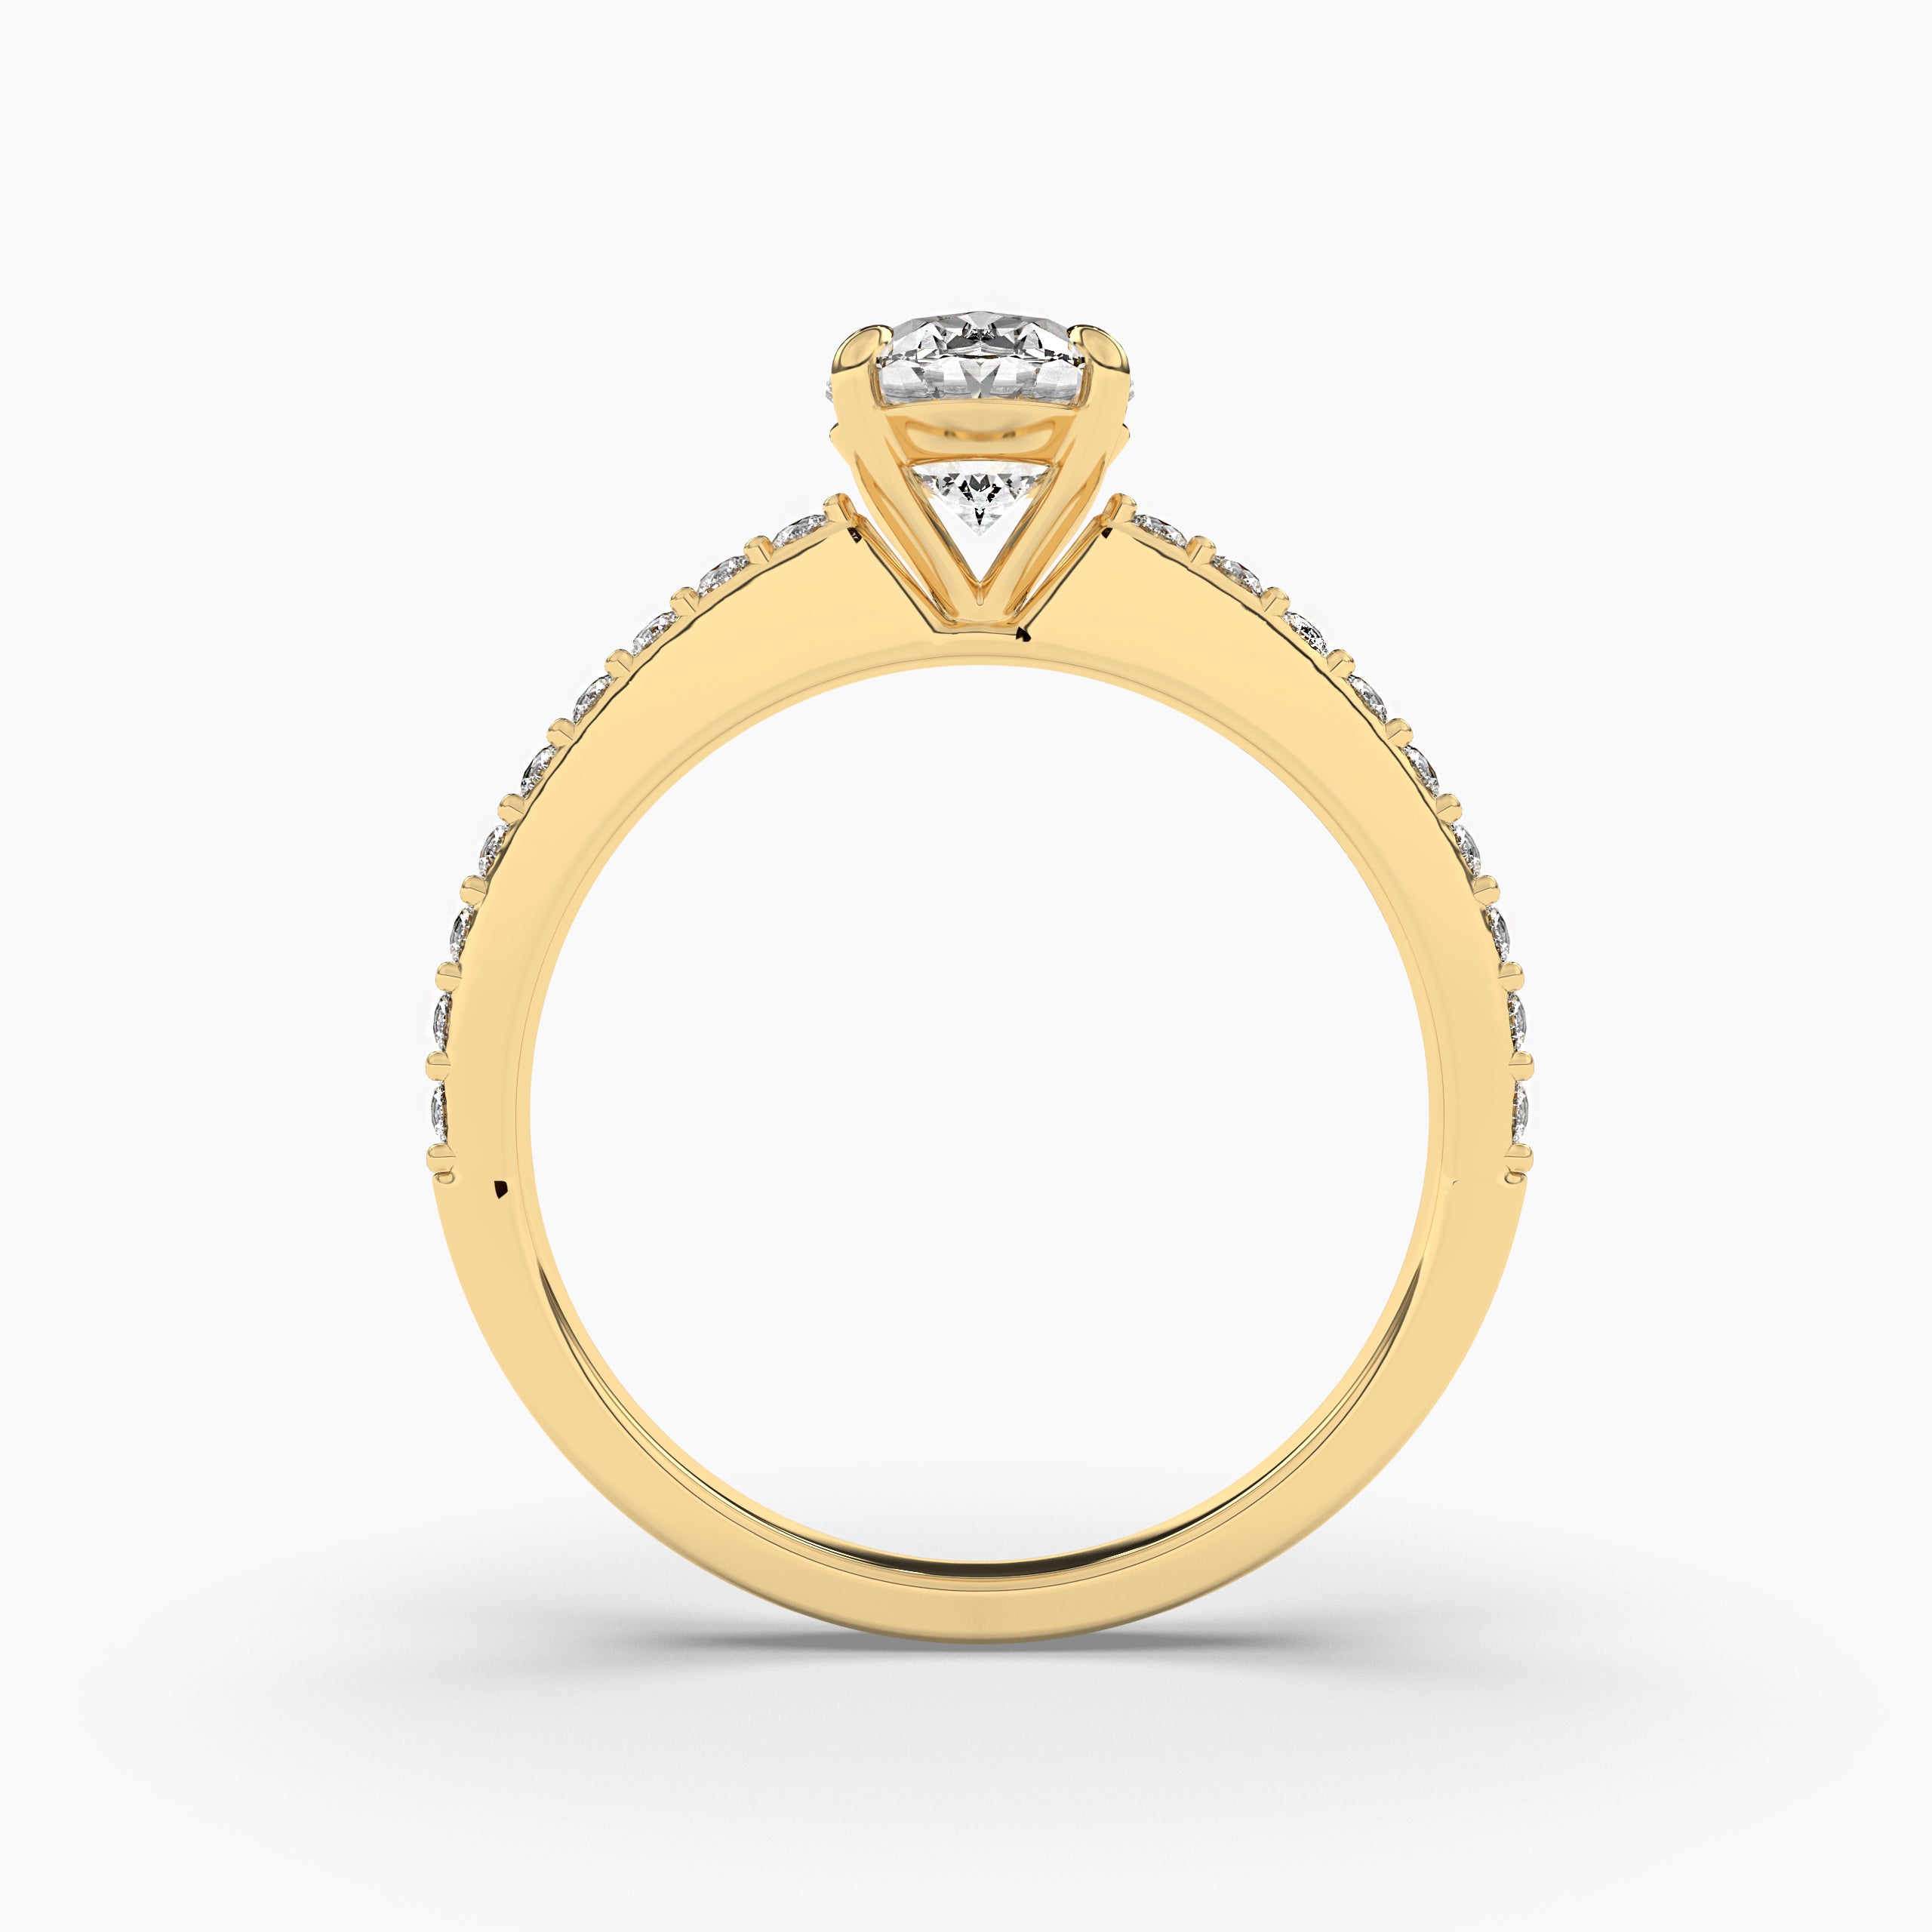 4 CARTE SIDE STONE ENGAGEMENT RING YELLOW GOLD